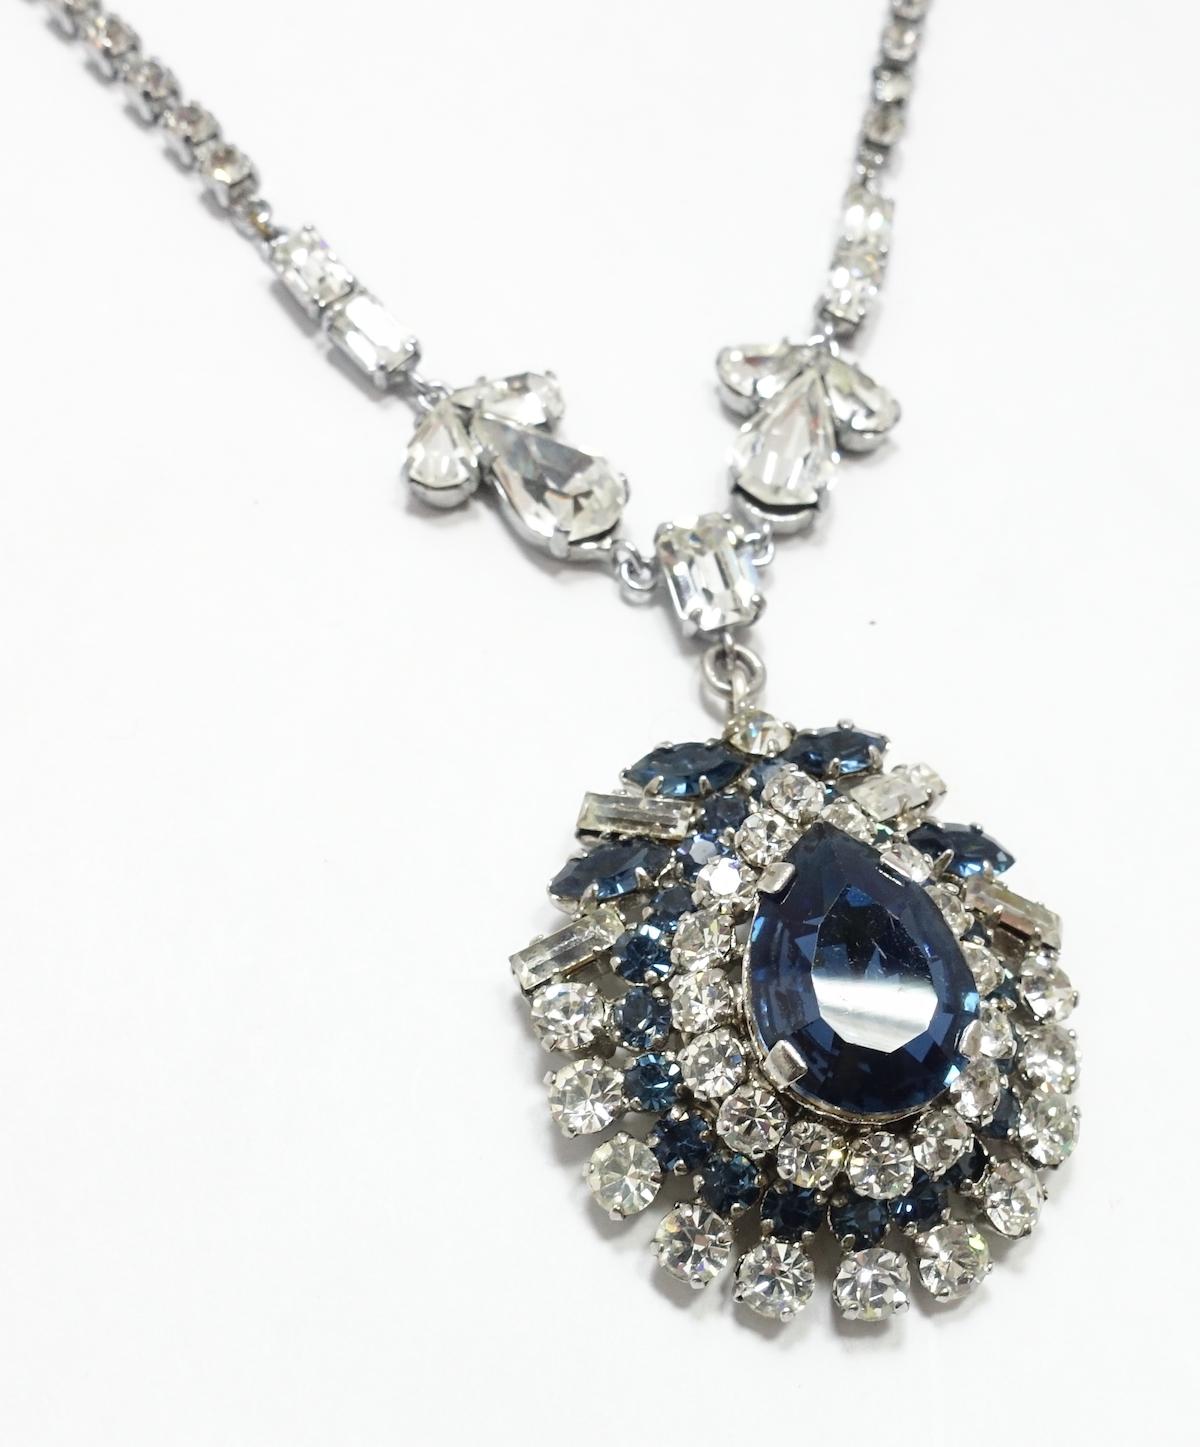 This vintage necklace features a teardrop pendant with blue and clear crystals in a silver-tone metal setting.  In excellent condition, the necklace measures 14” x 1/8” with a spring closure; the pendant is 1-1/2” x 1-3/8”. It is an unsigned piece,